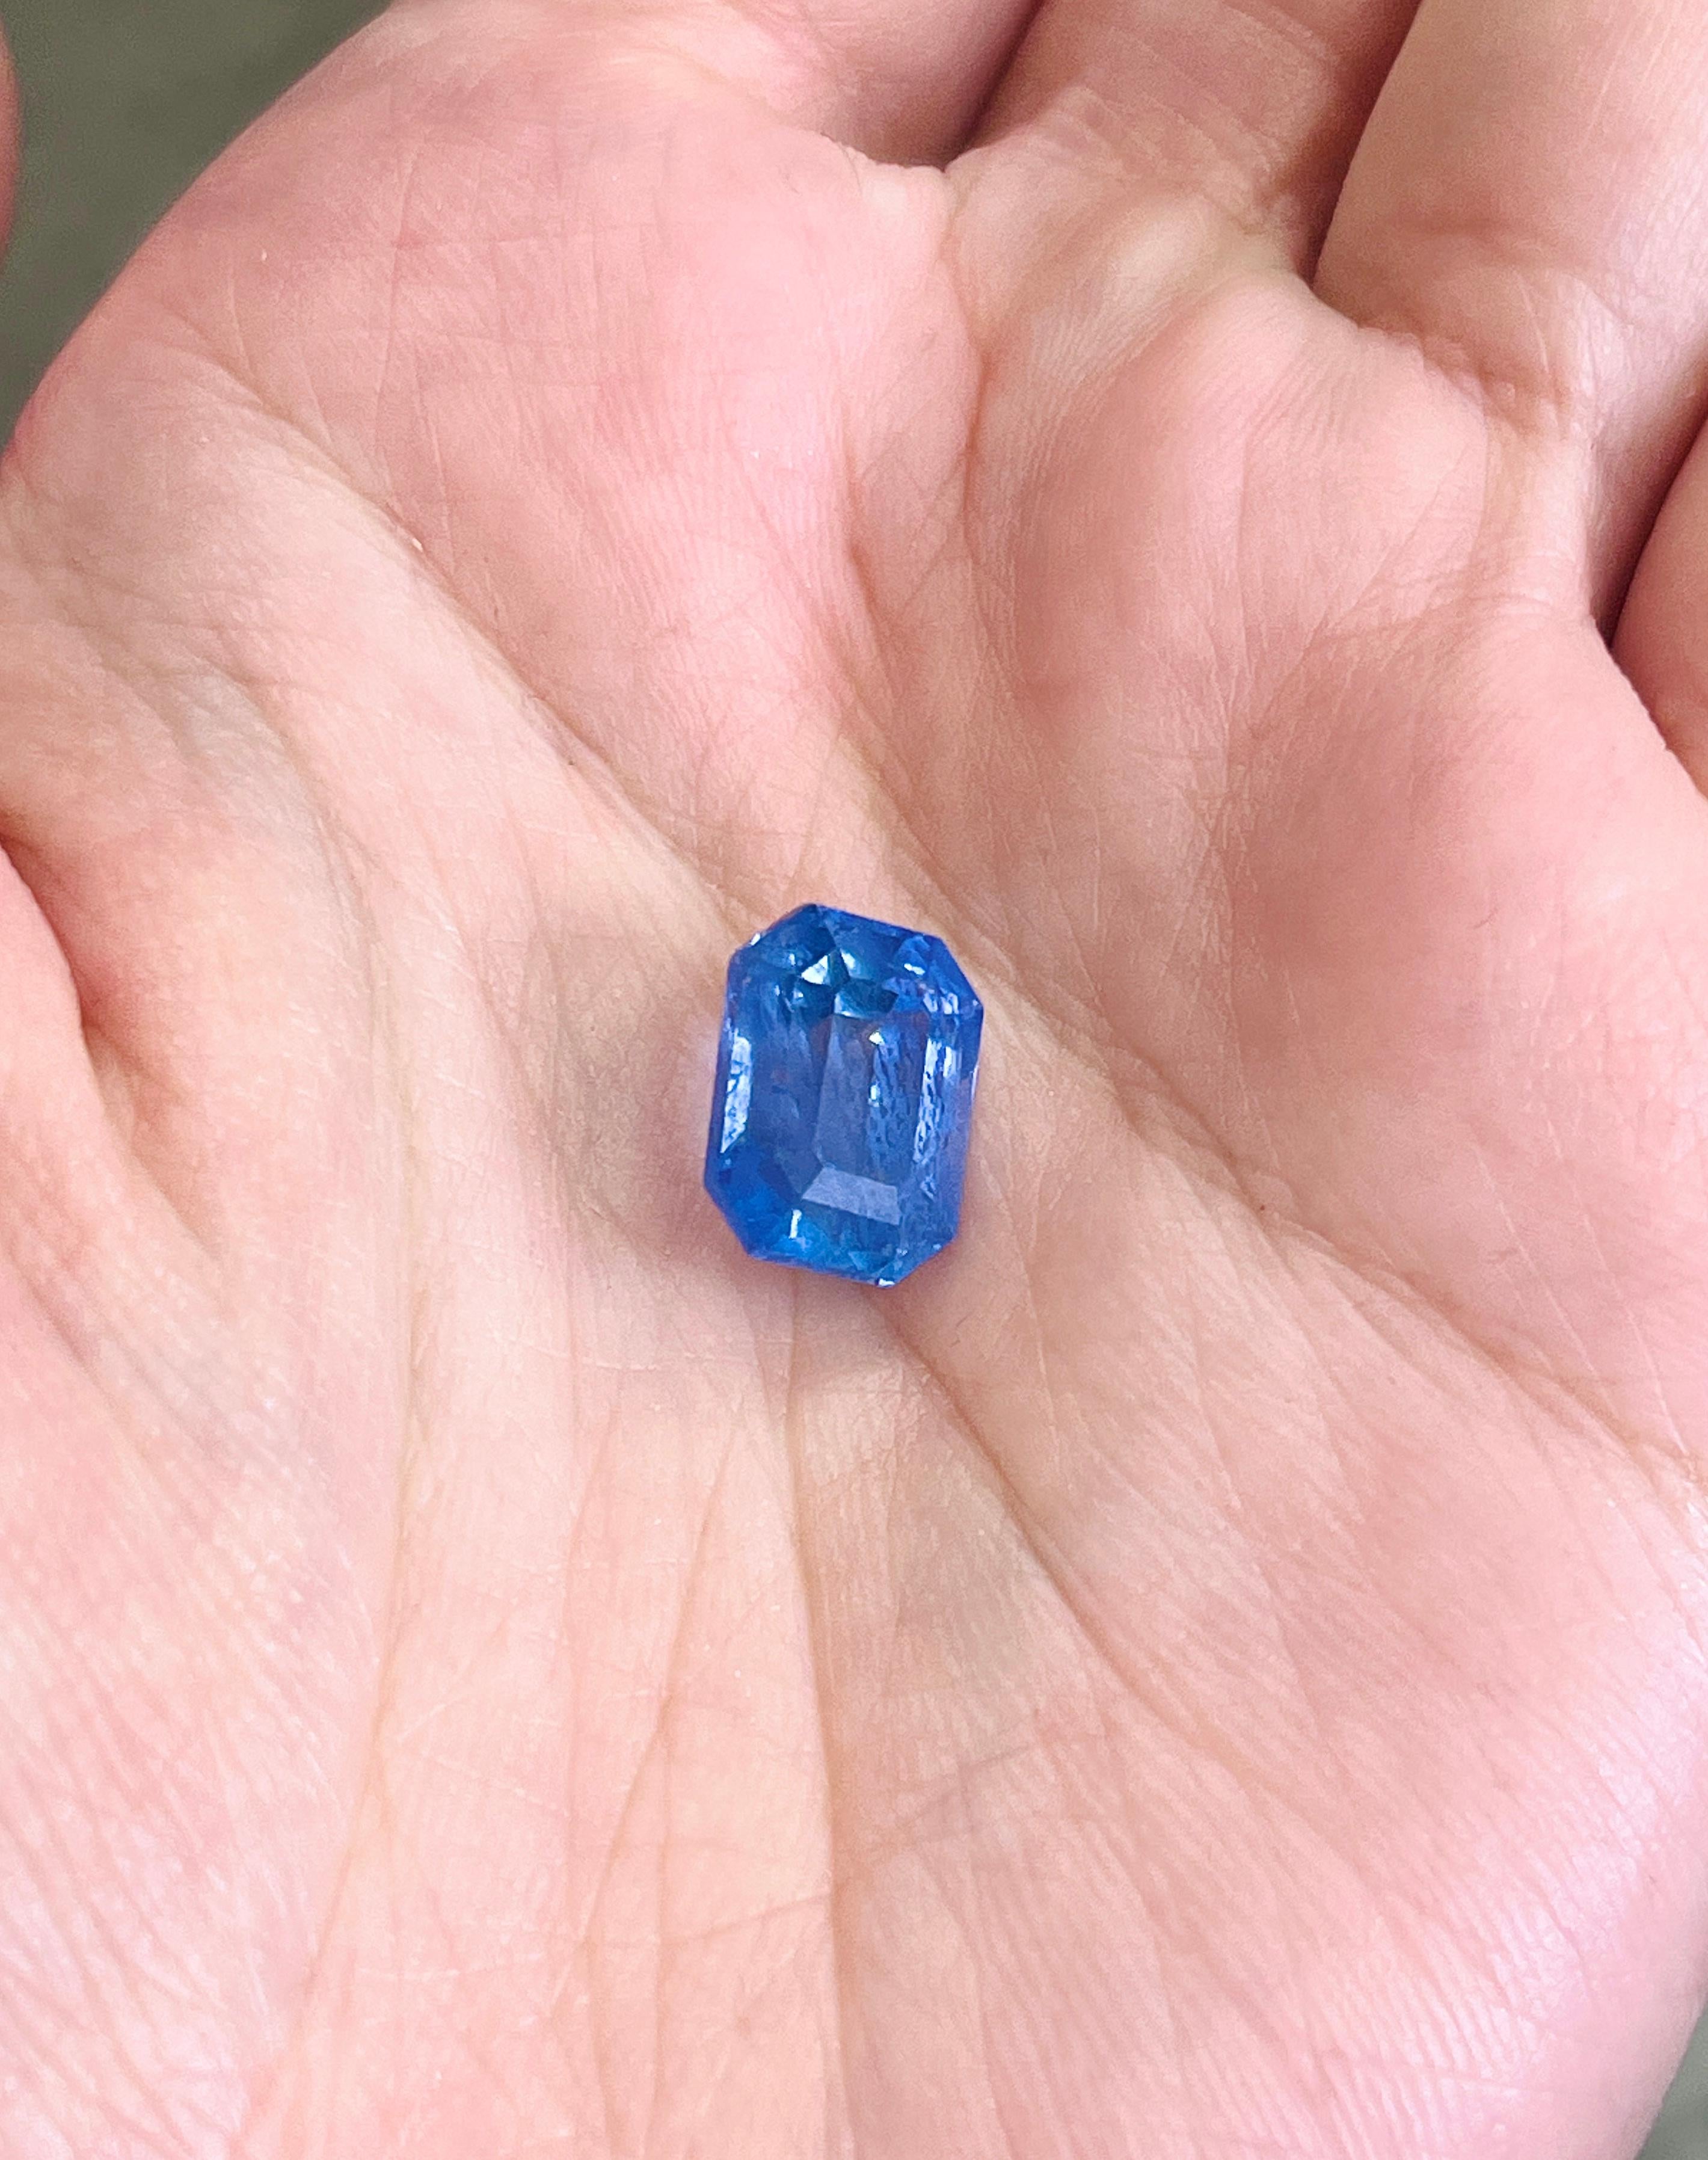 8.29 CTS NATURAL LIGHT BLUE RADIANT CUT GENUINE SAPPHIRE LOOSE GEM
STANDARD HEAT ONLY TREATEMENT, GORGEOUS COLOR AND SIZE
MEASUREMENTS 11.50mm X 8.90mm 